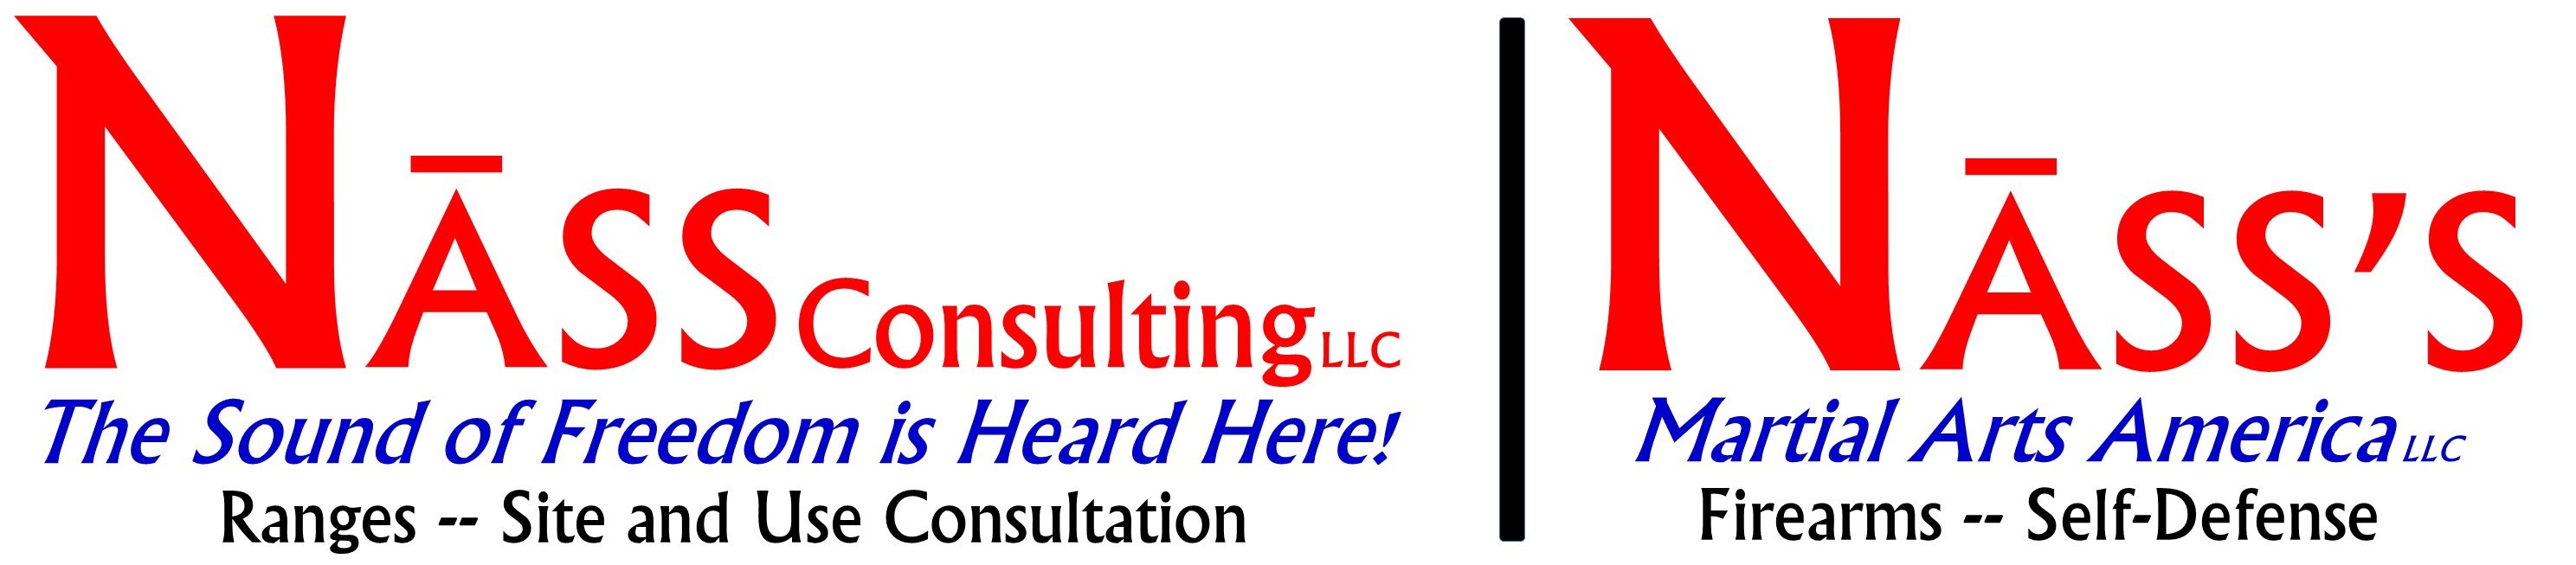 Nass Consulting LLC